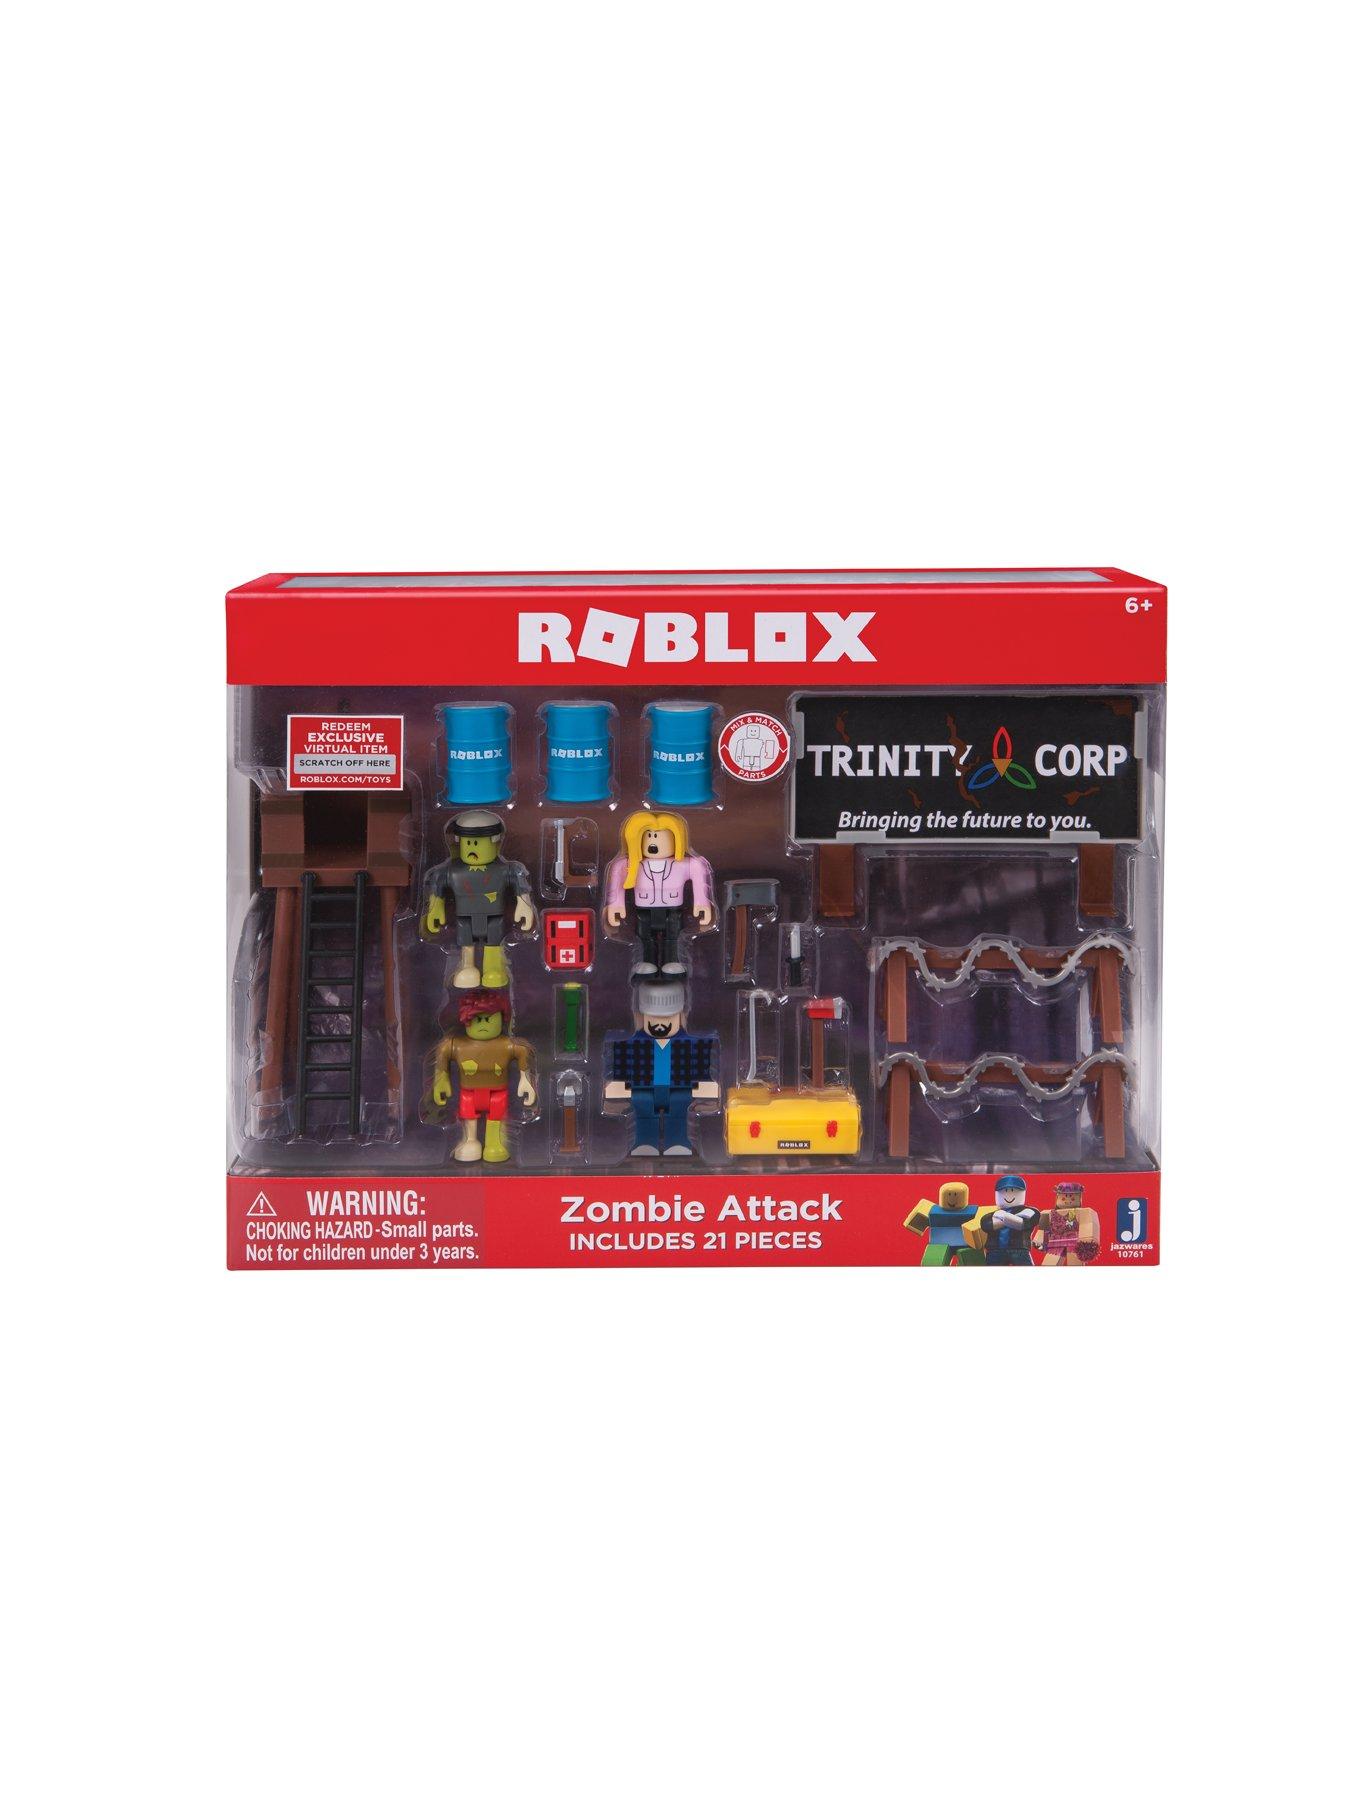 Roblox Zombie Attack Playset Very Co Uk - roblox zombie attack playset view larger